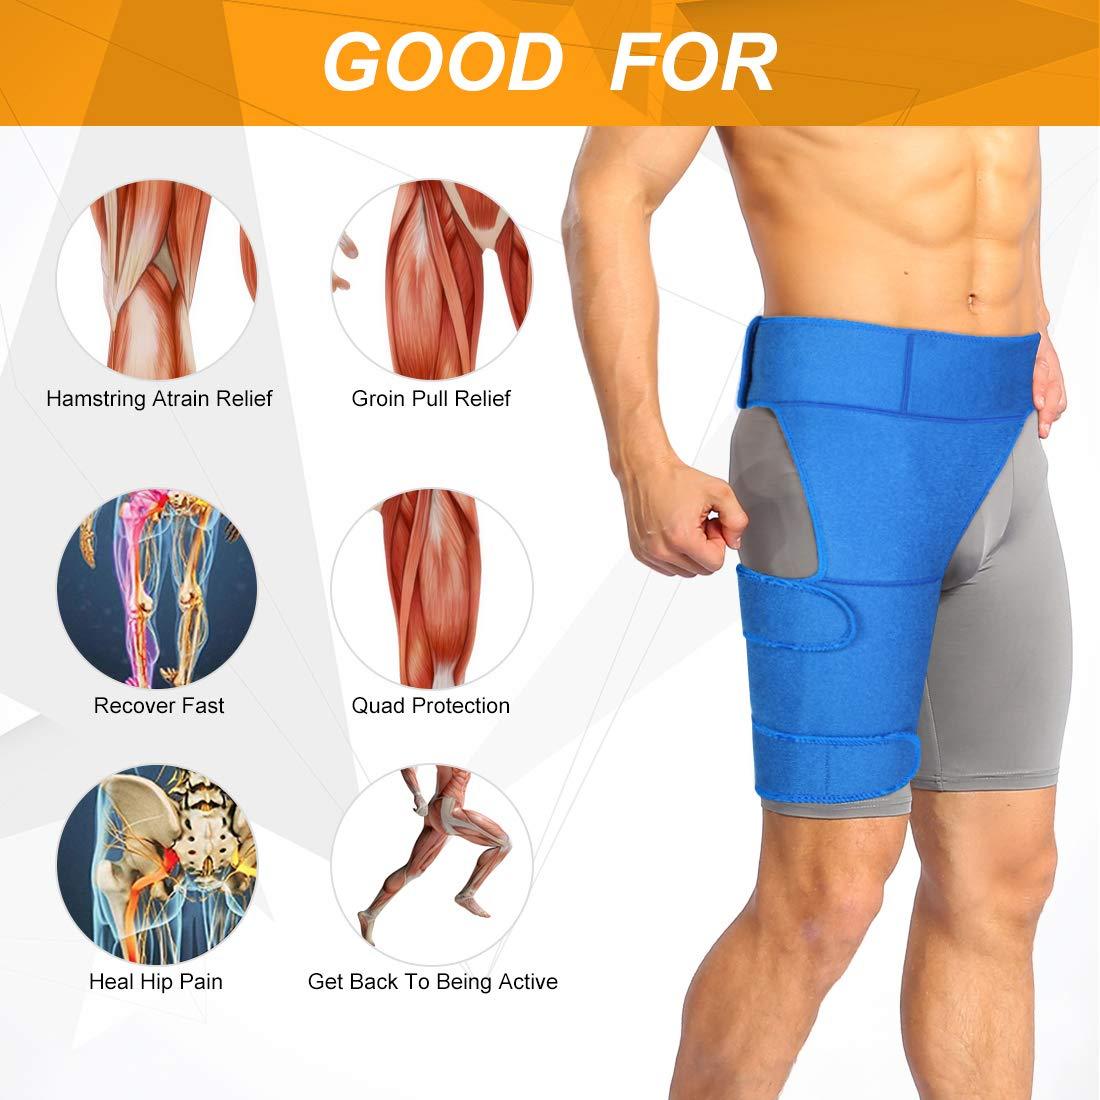 Cramer Men's GH2 Support System Strap for Groin Pain, Hip Injuries, Pull  Leg Muscles, and Running, Hip Support, Groin Support, Groin Compression  Wrap